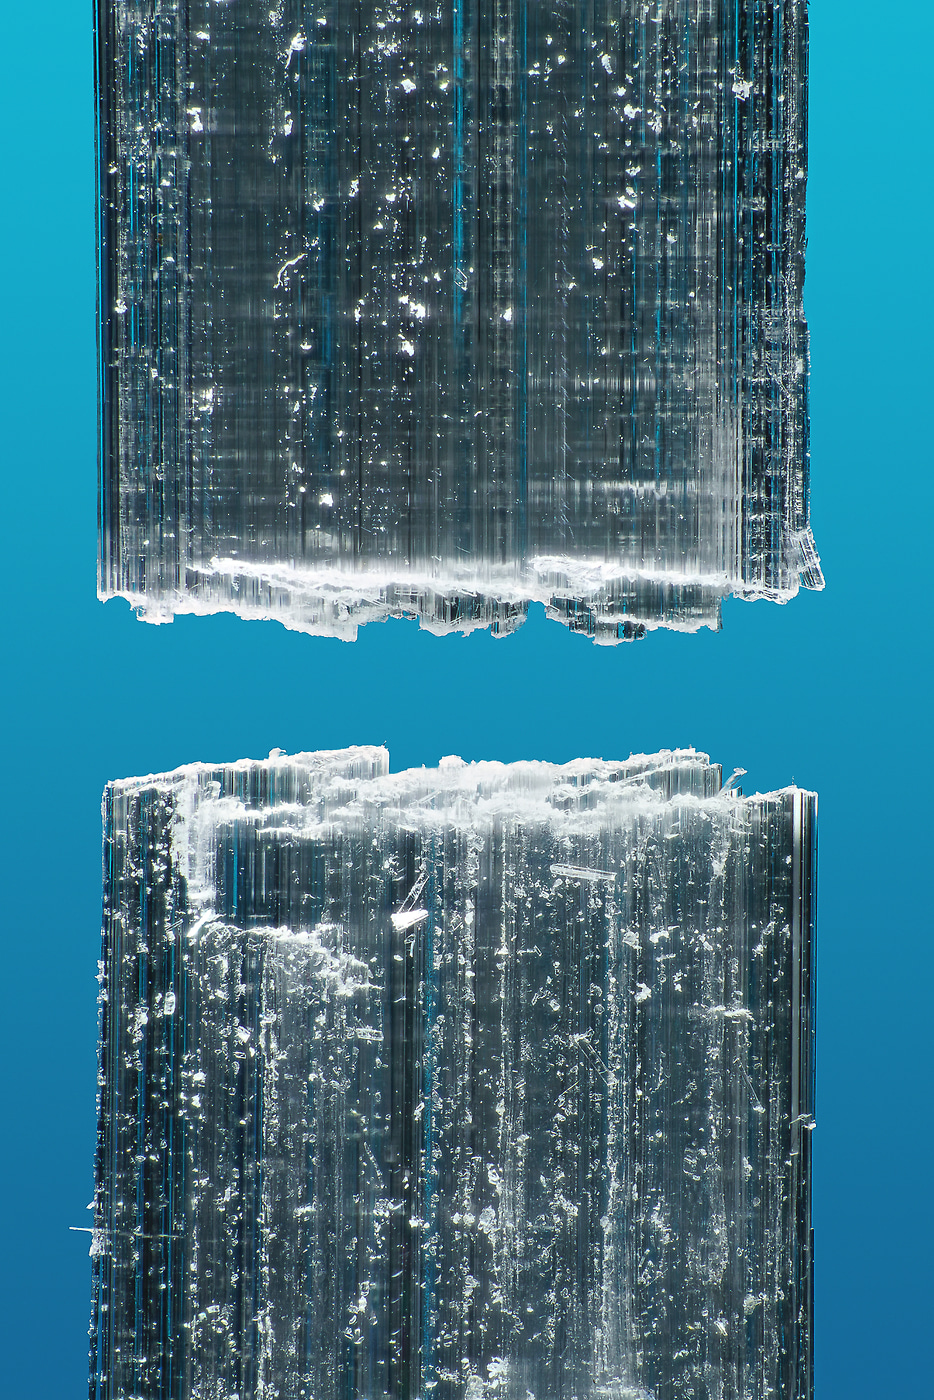 42 megapixels! A very high resolution photo of crystals; VAST photo created by Steph Mantis & Dan Piech.